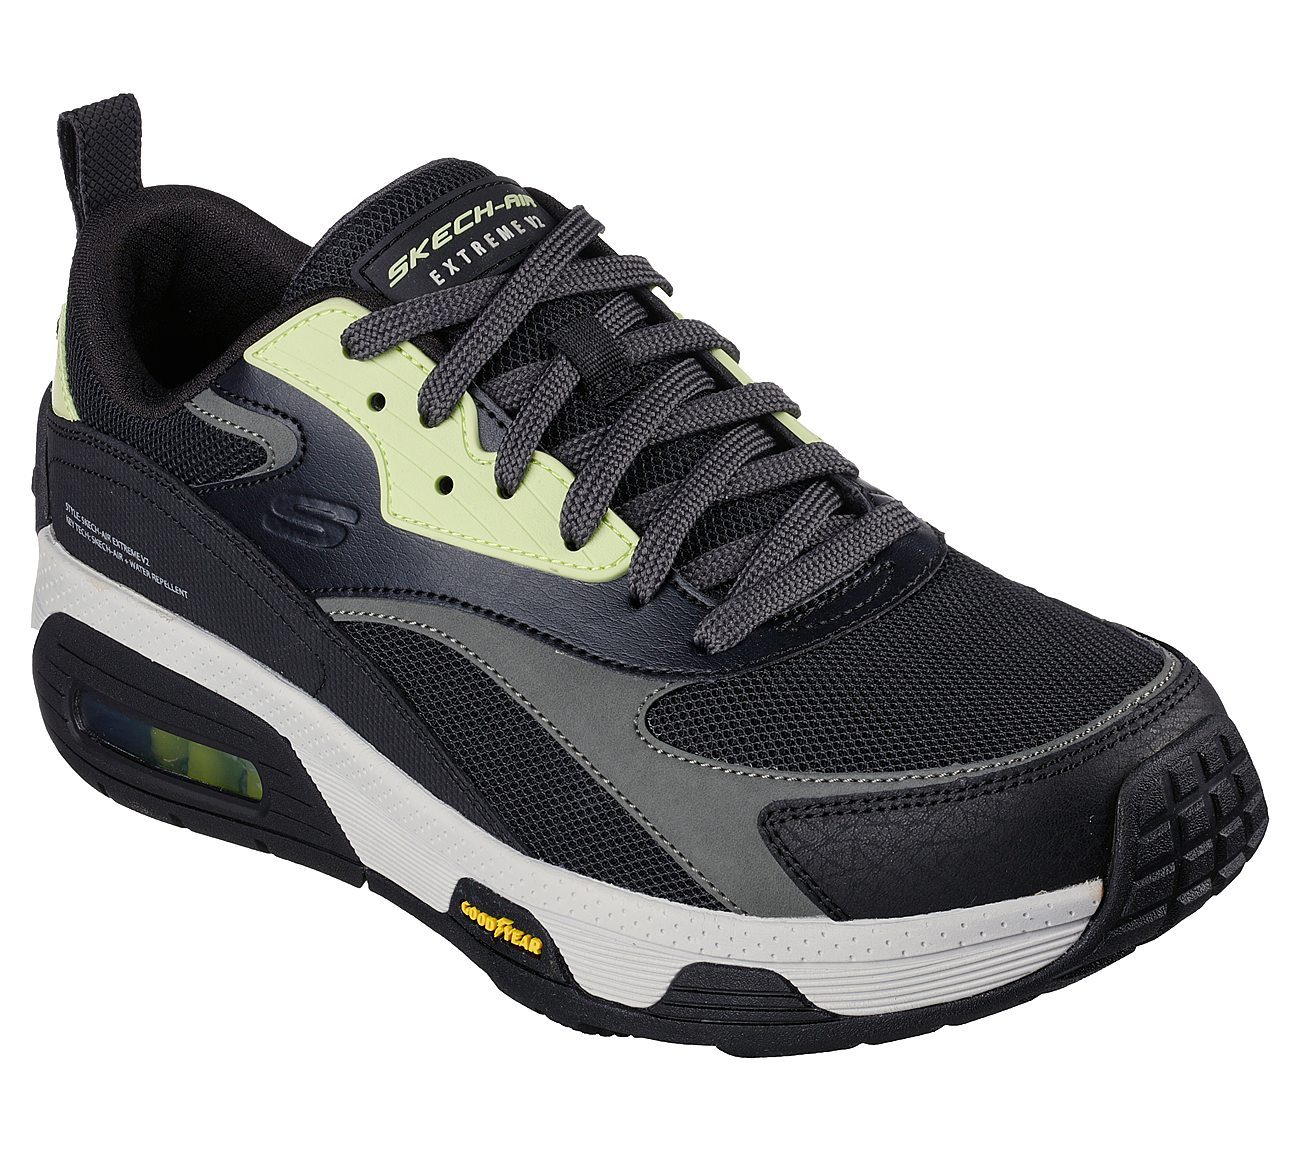 SKECH-AIR EXTREME V2, BLACK/LIME Footwear Lateral View